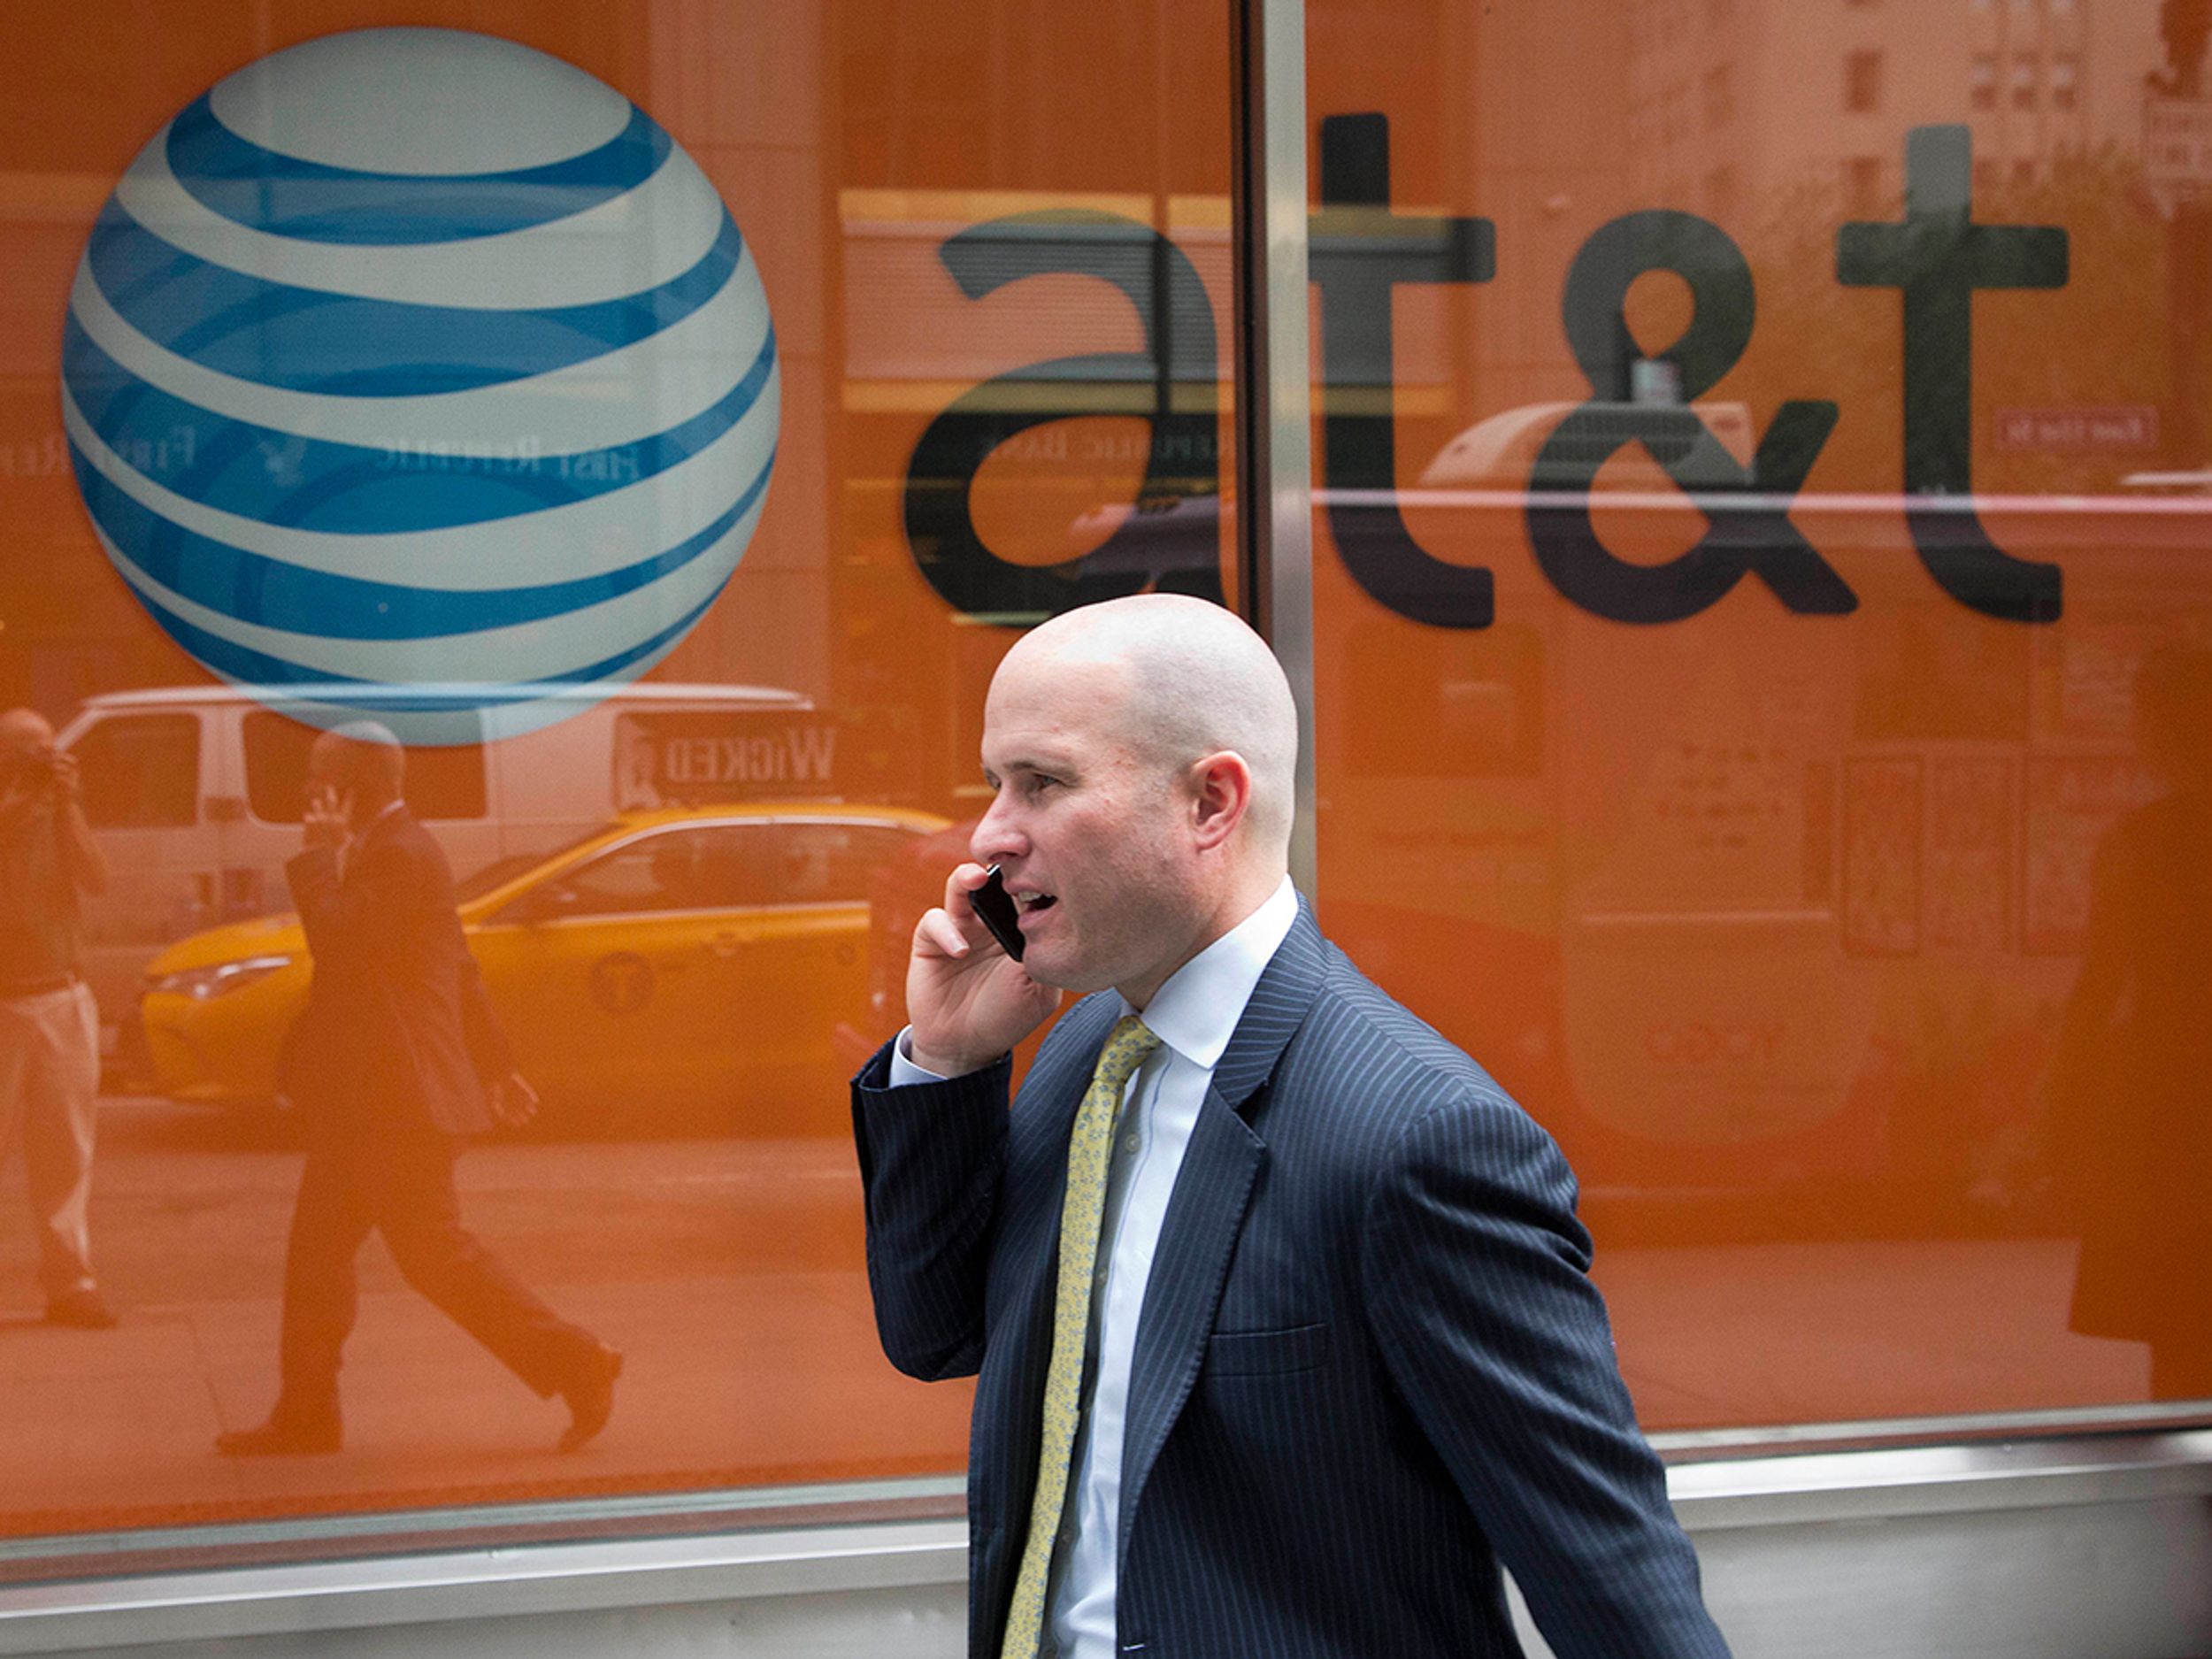 A man using a mobile phone walks past an AT&T store in New York.